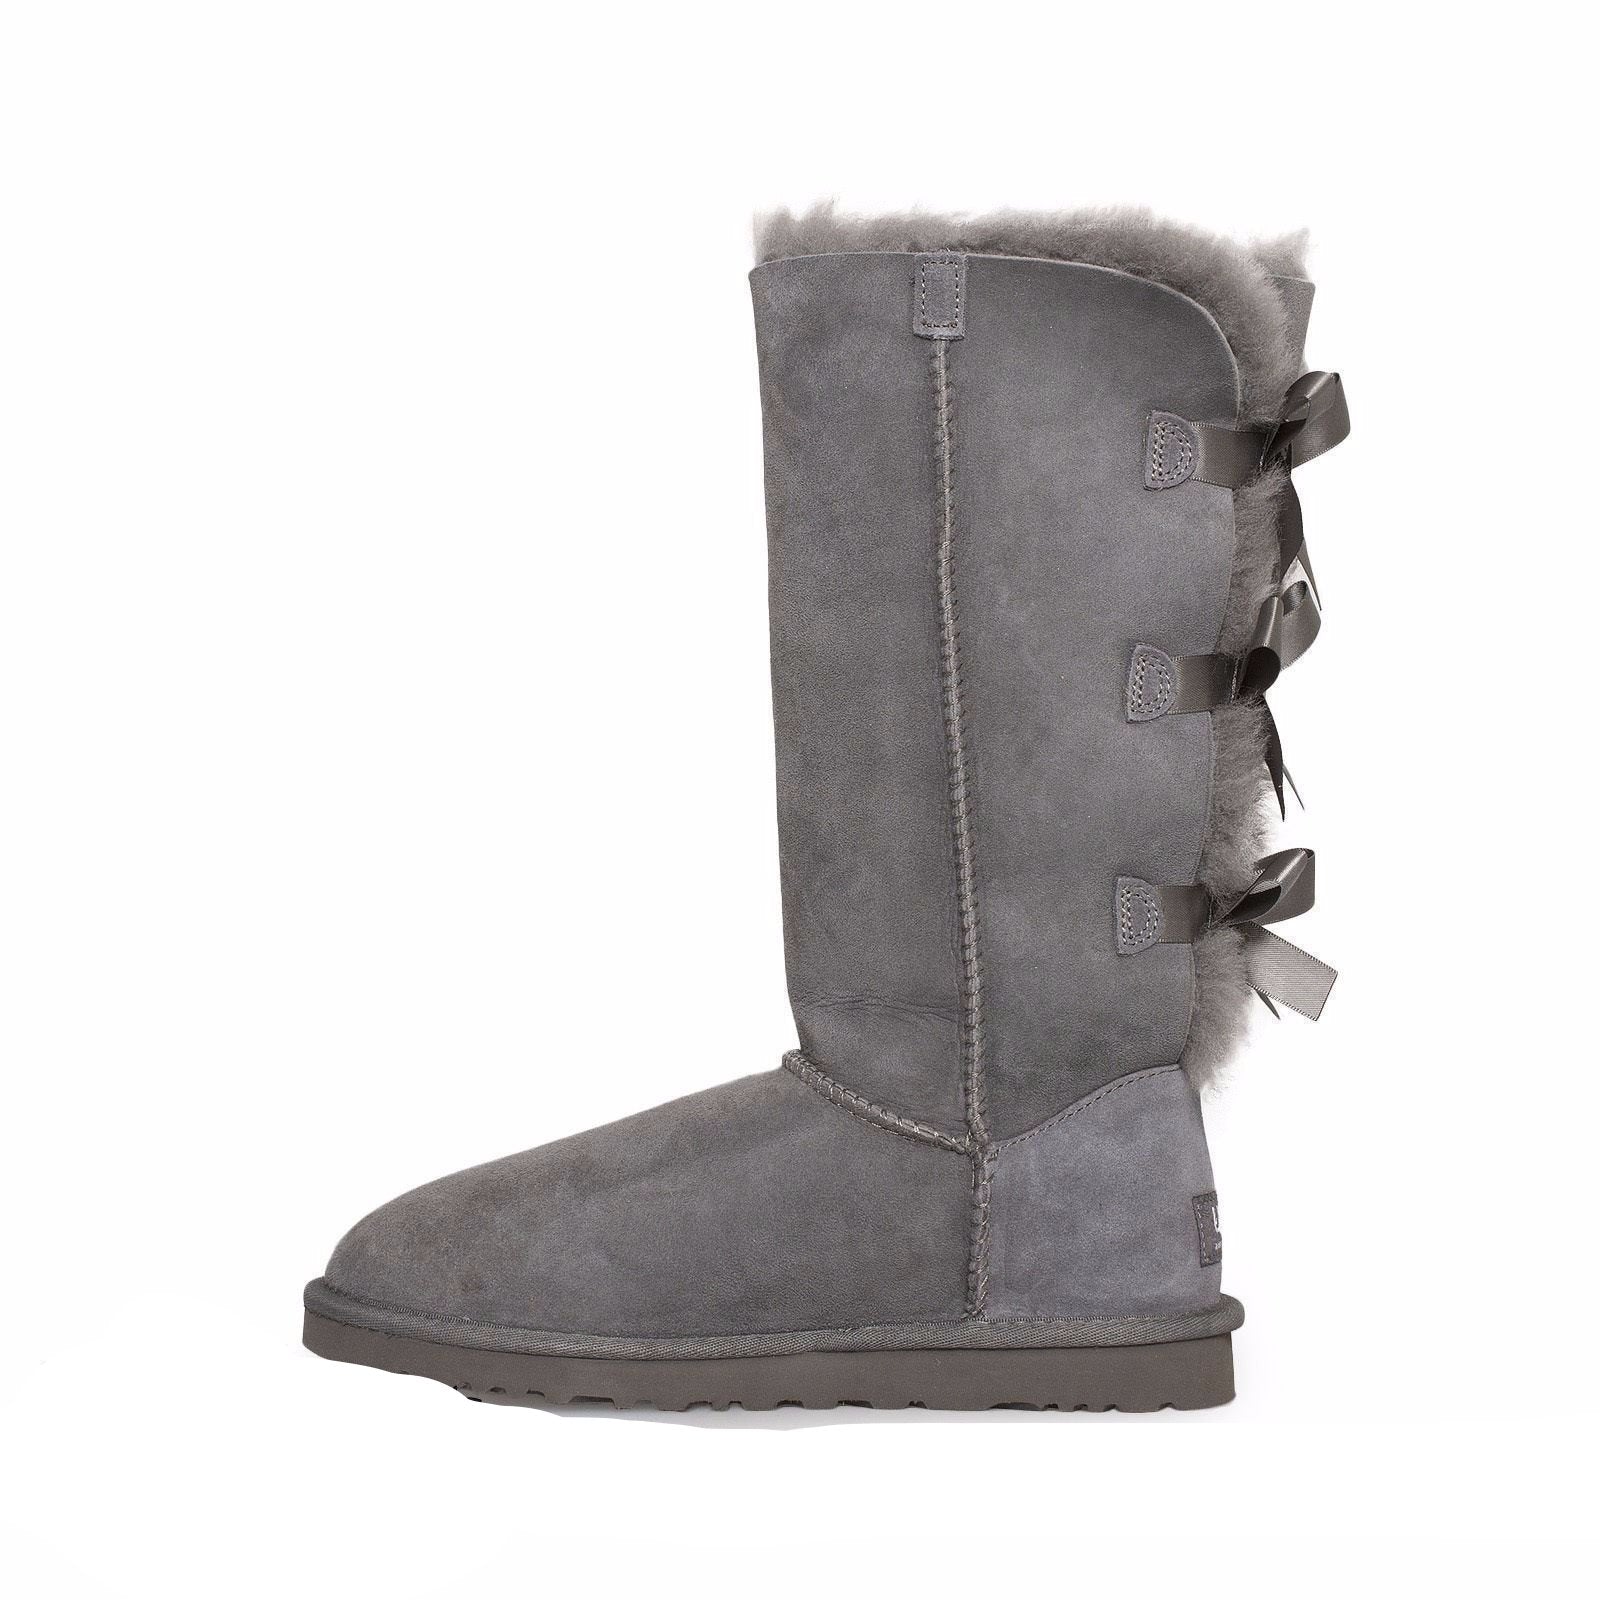 tall gray ugg boots with bows